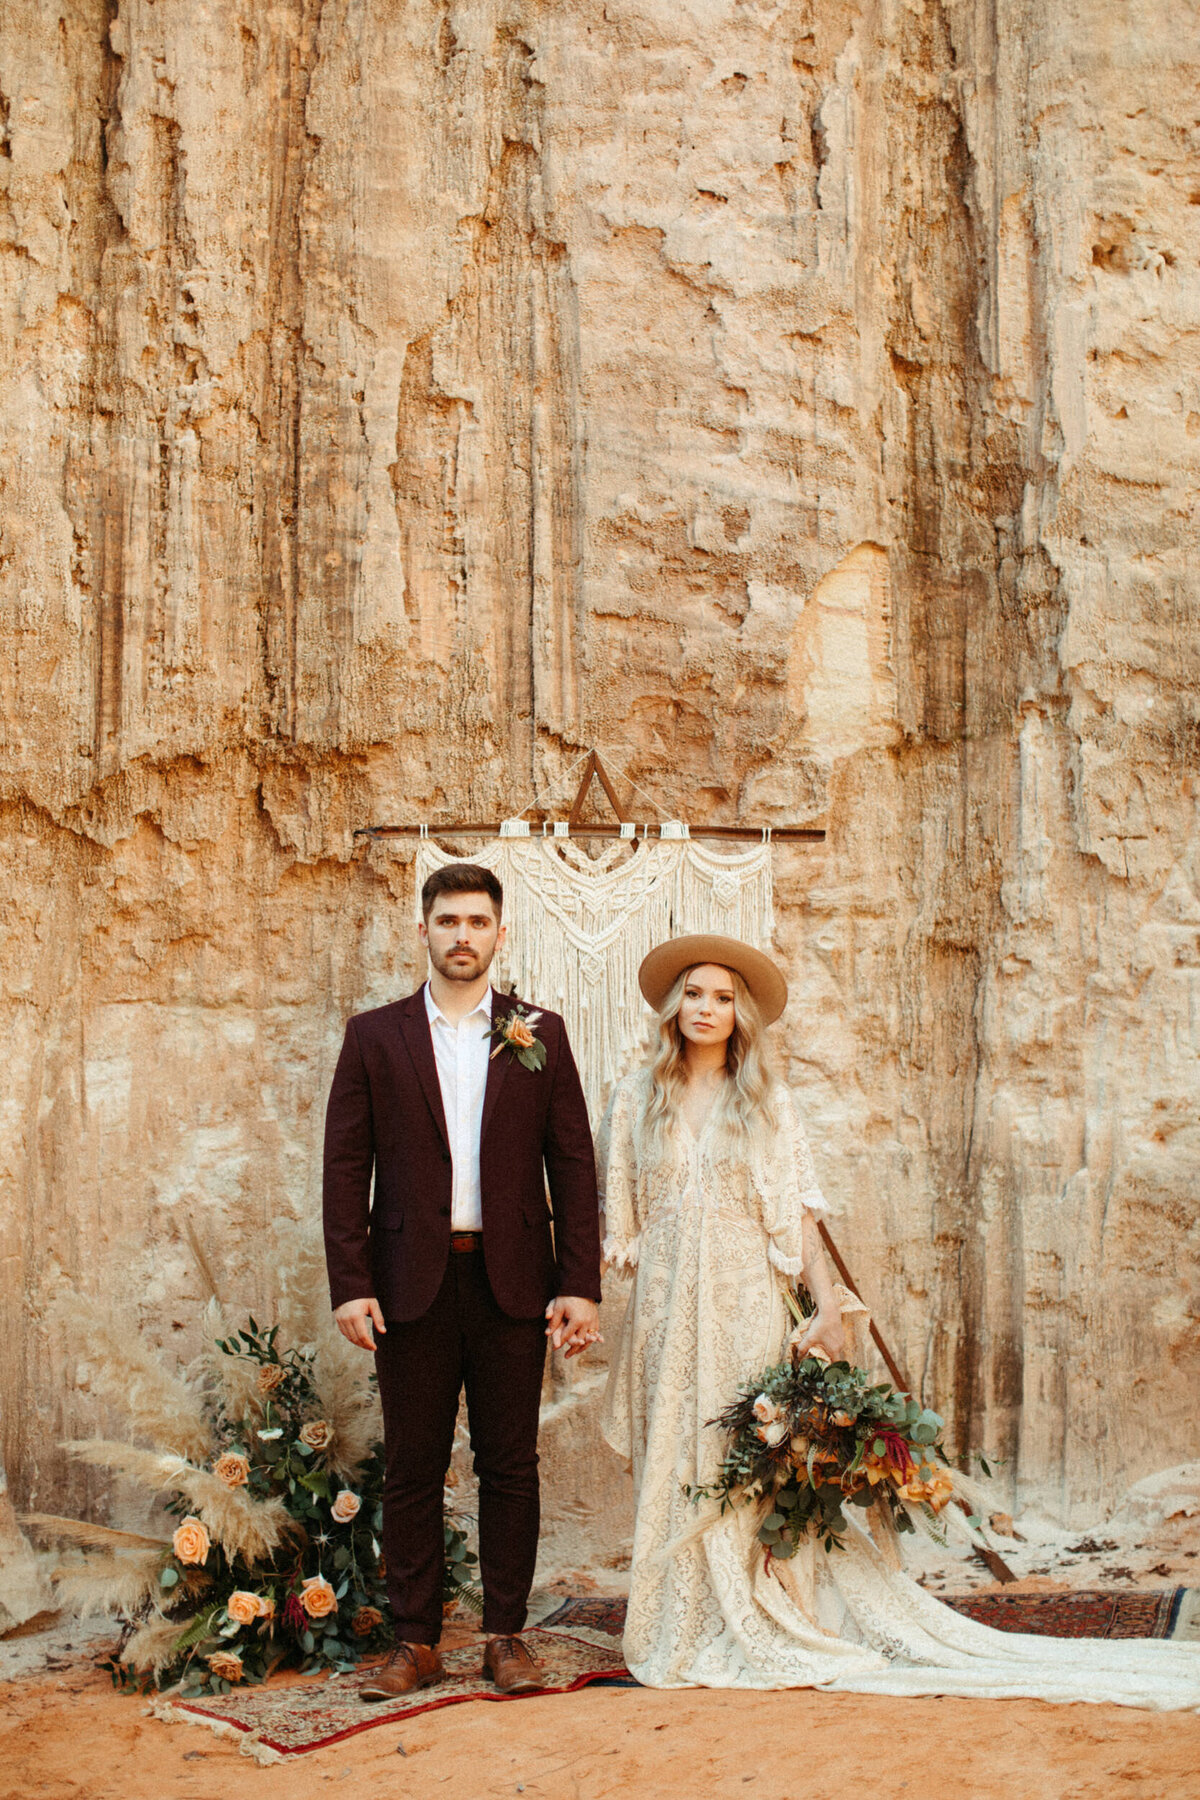 Eloping bride and groom standing in front of canyon wall at the ceremony site with vintage rugs and macrame arch decor